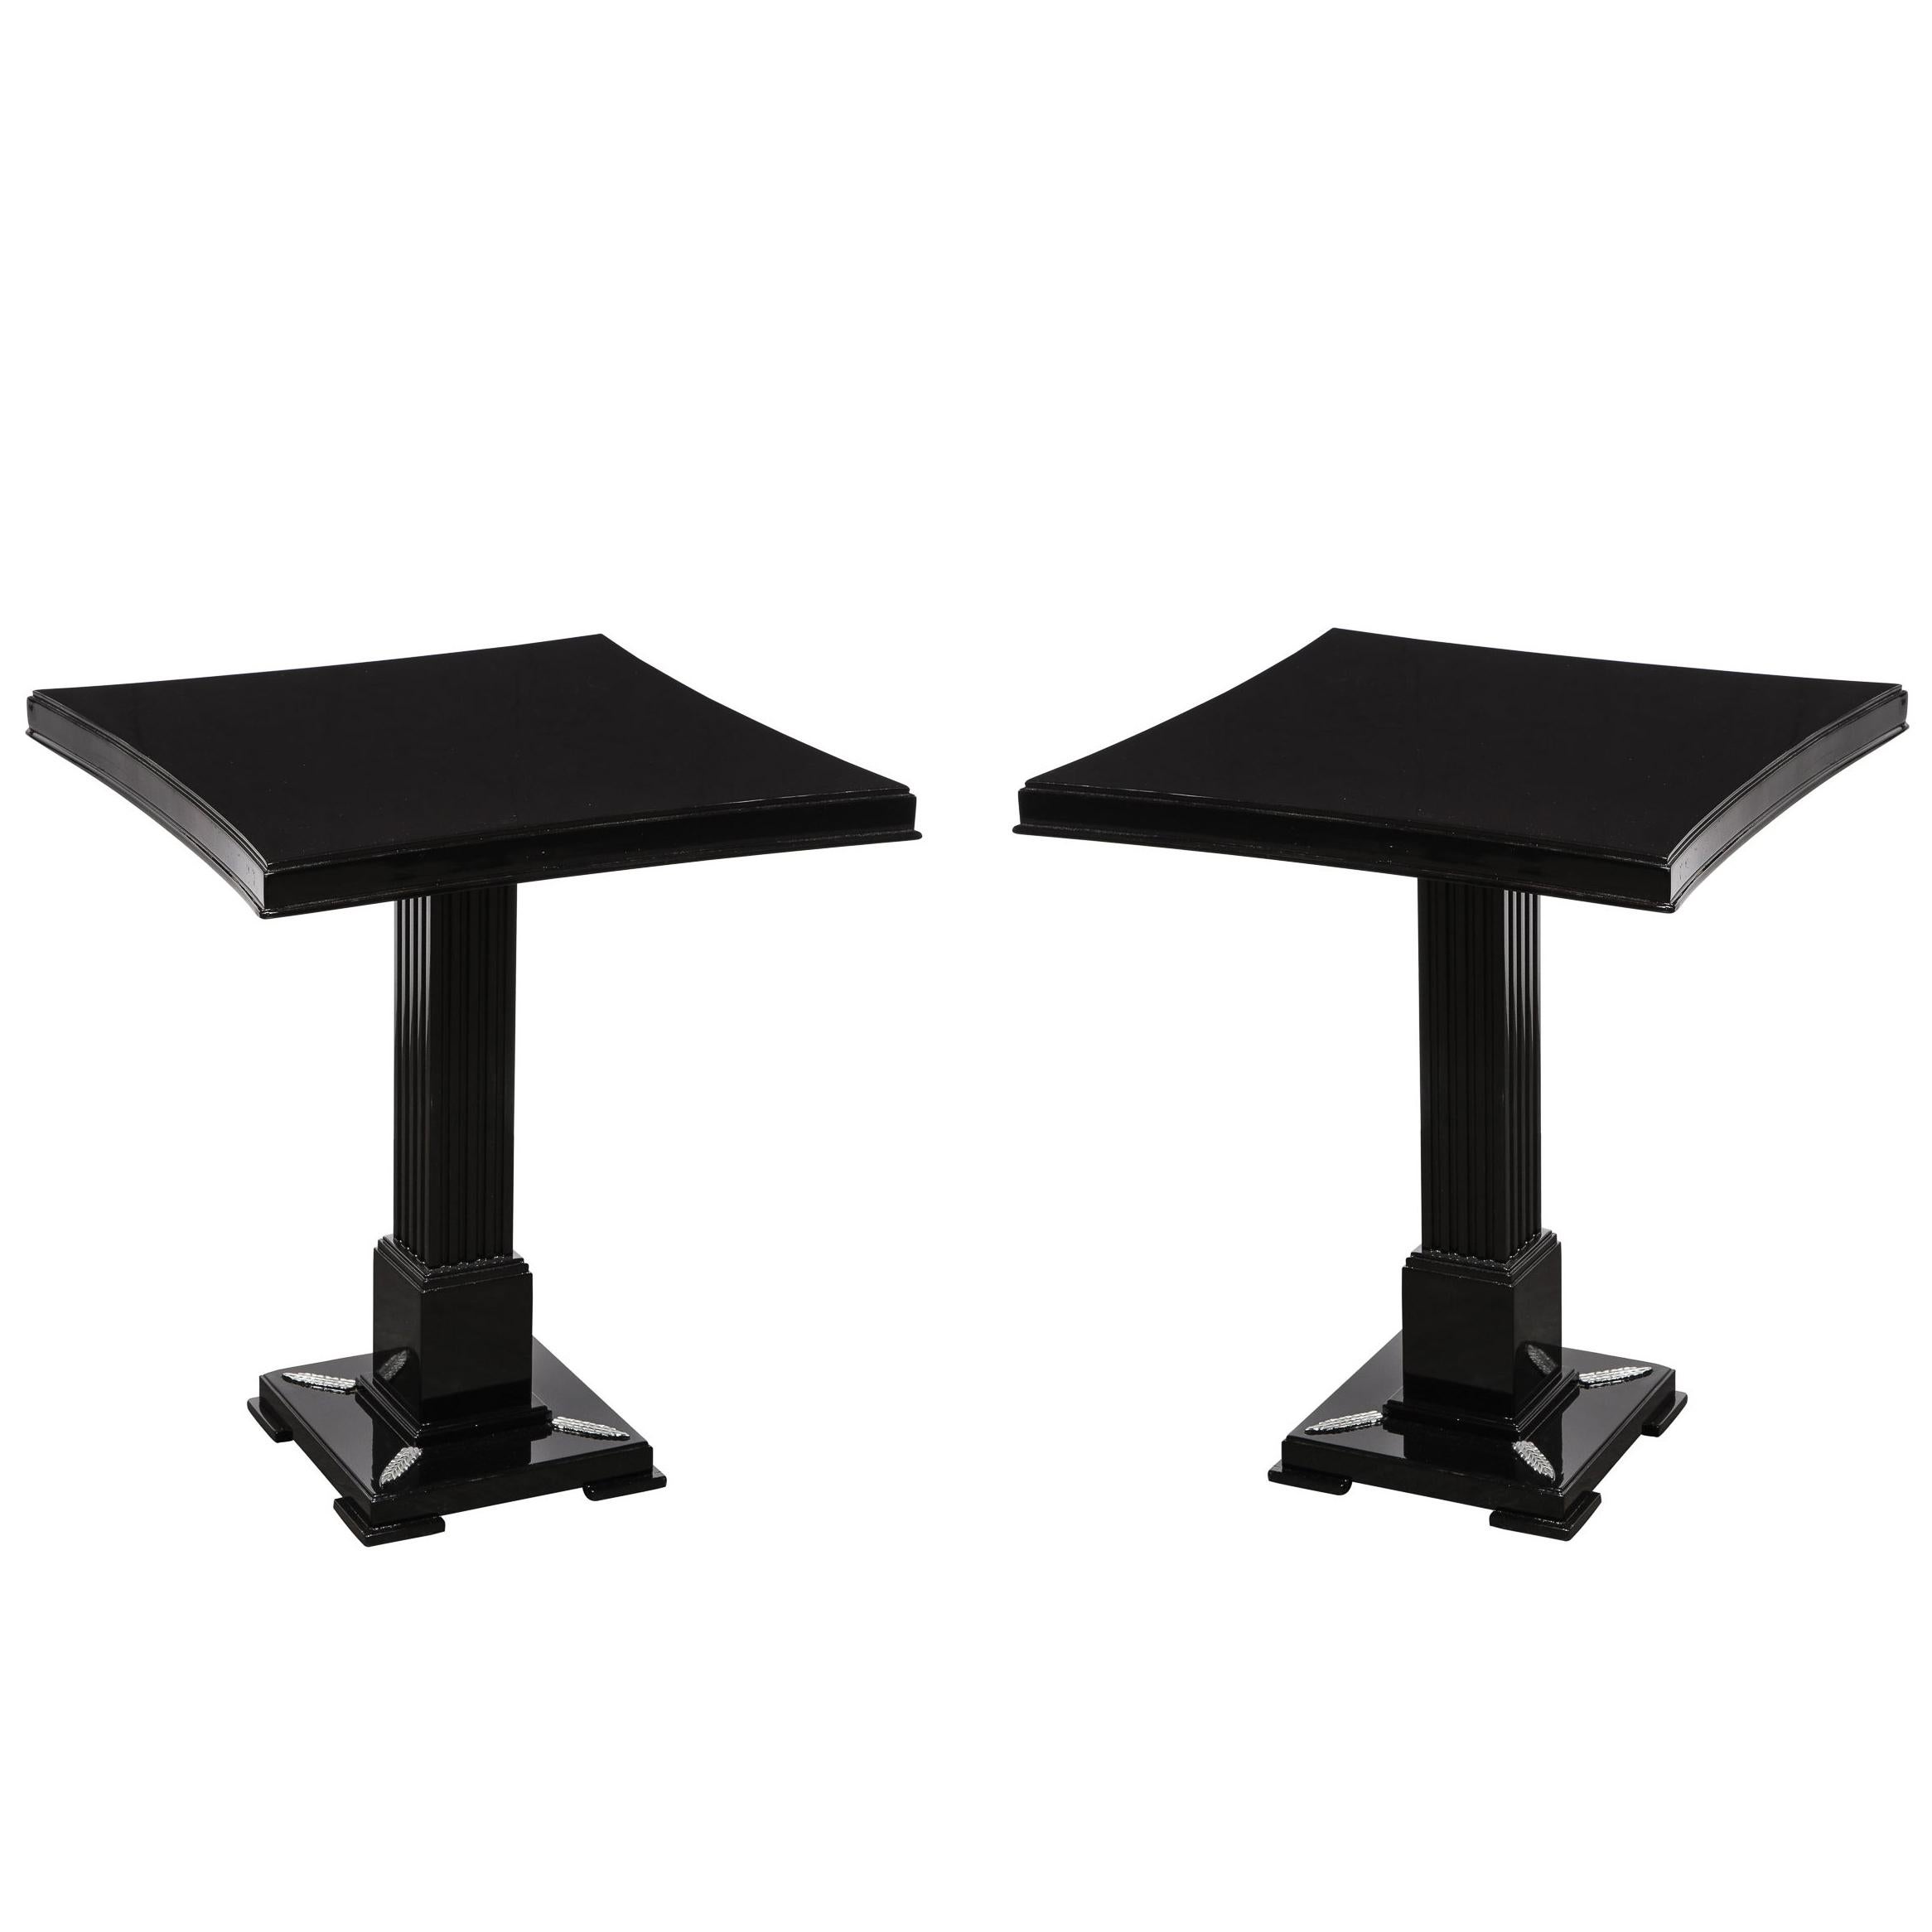 Pair of Occasional Tables in Black Lacquer with Pedestal Bases by Grosfeld House